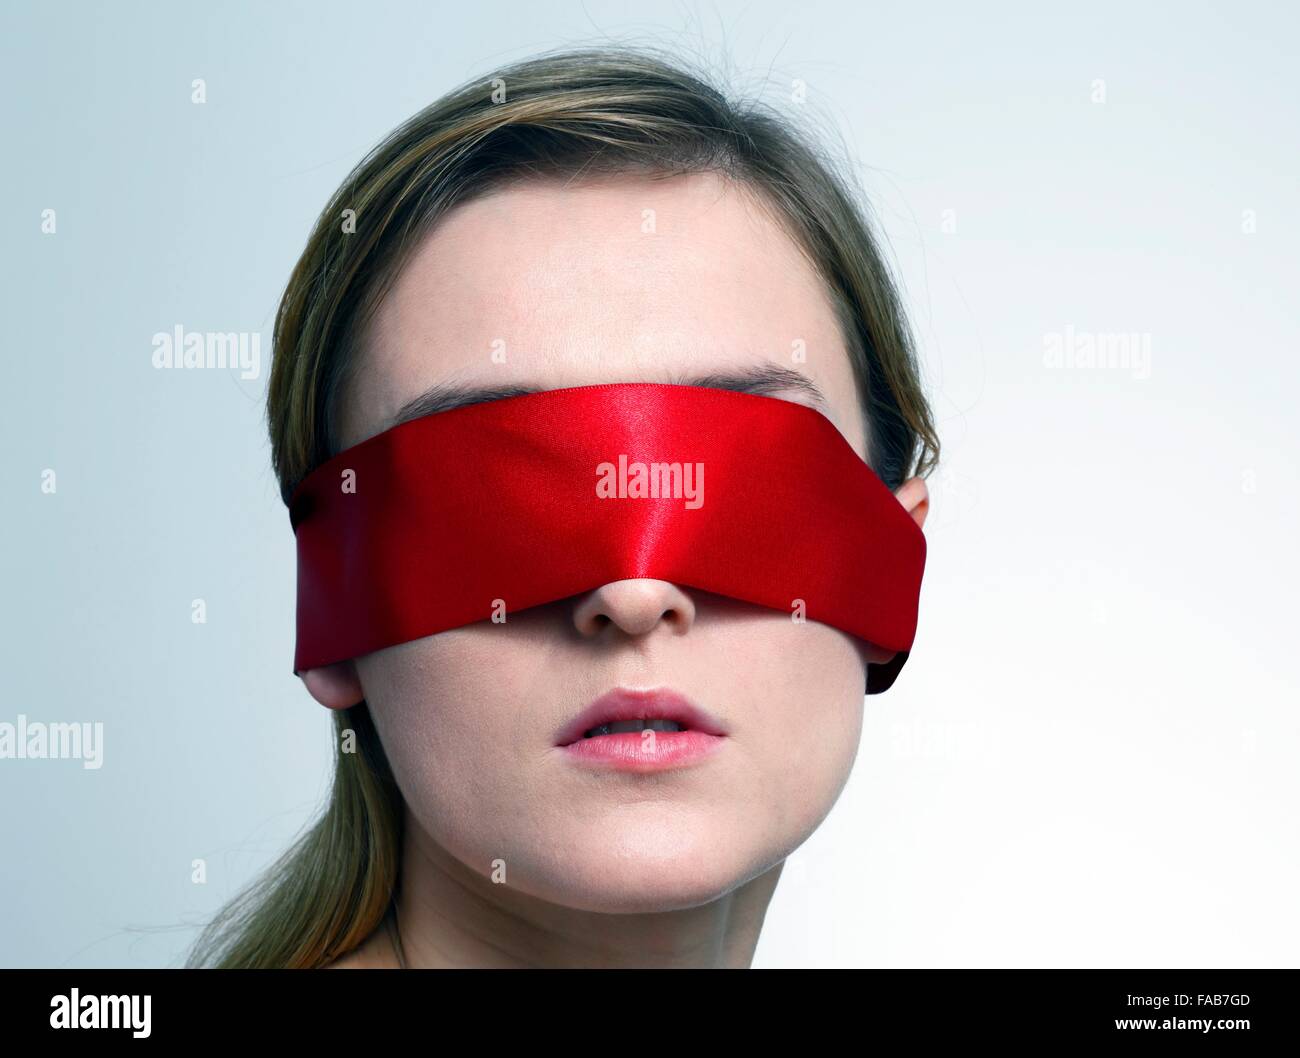 Red Blindfolded Woman Gallery Wrap - AFD Home